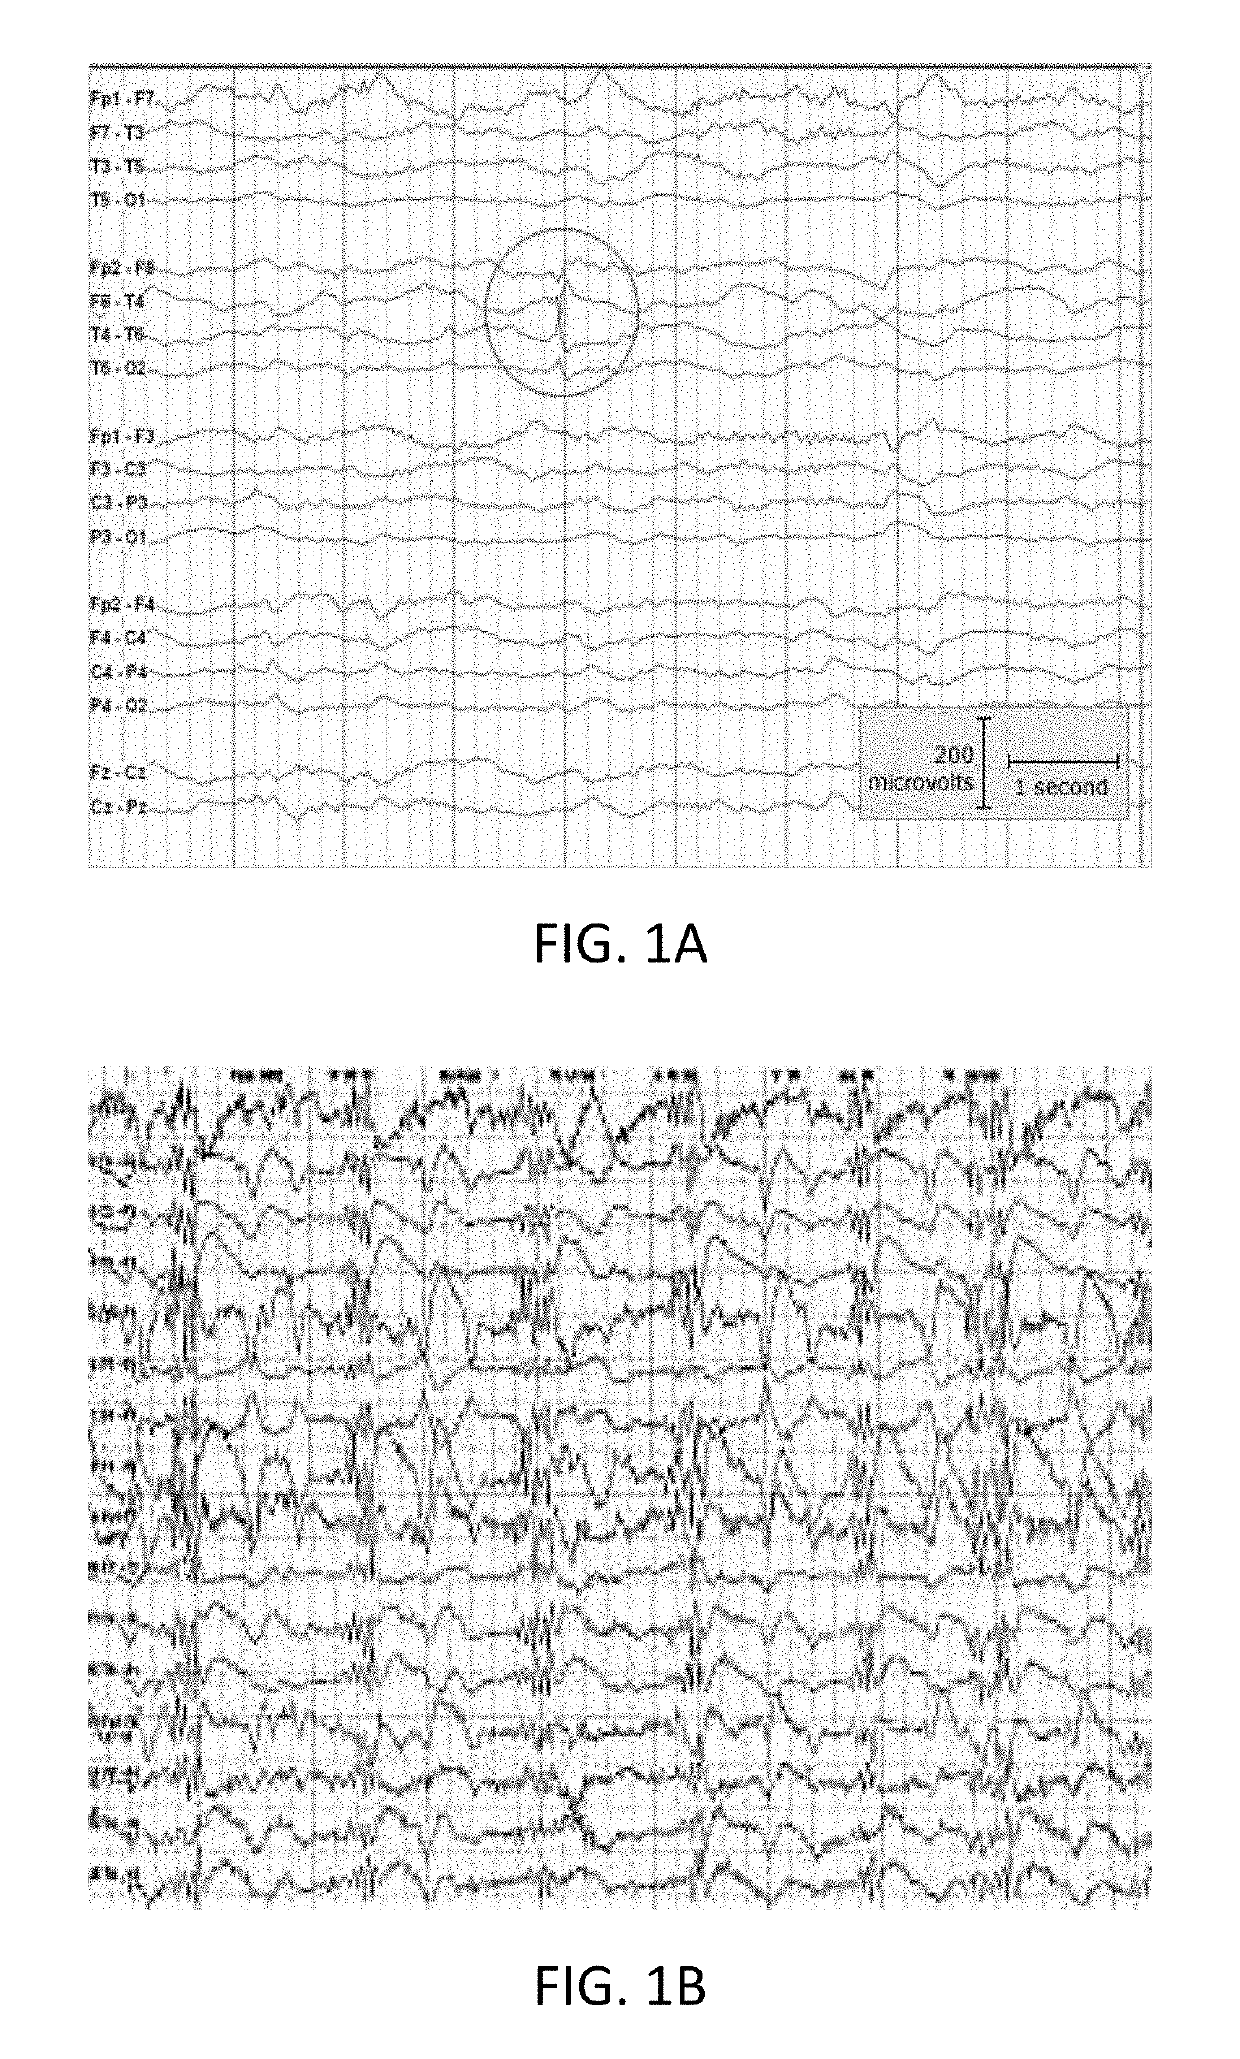 System and Method for Automatic Interpretation of EEG Signals Using a Deep Learning Statistical Model